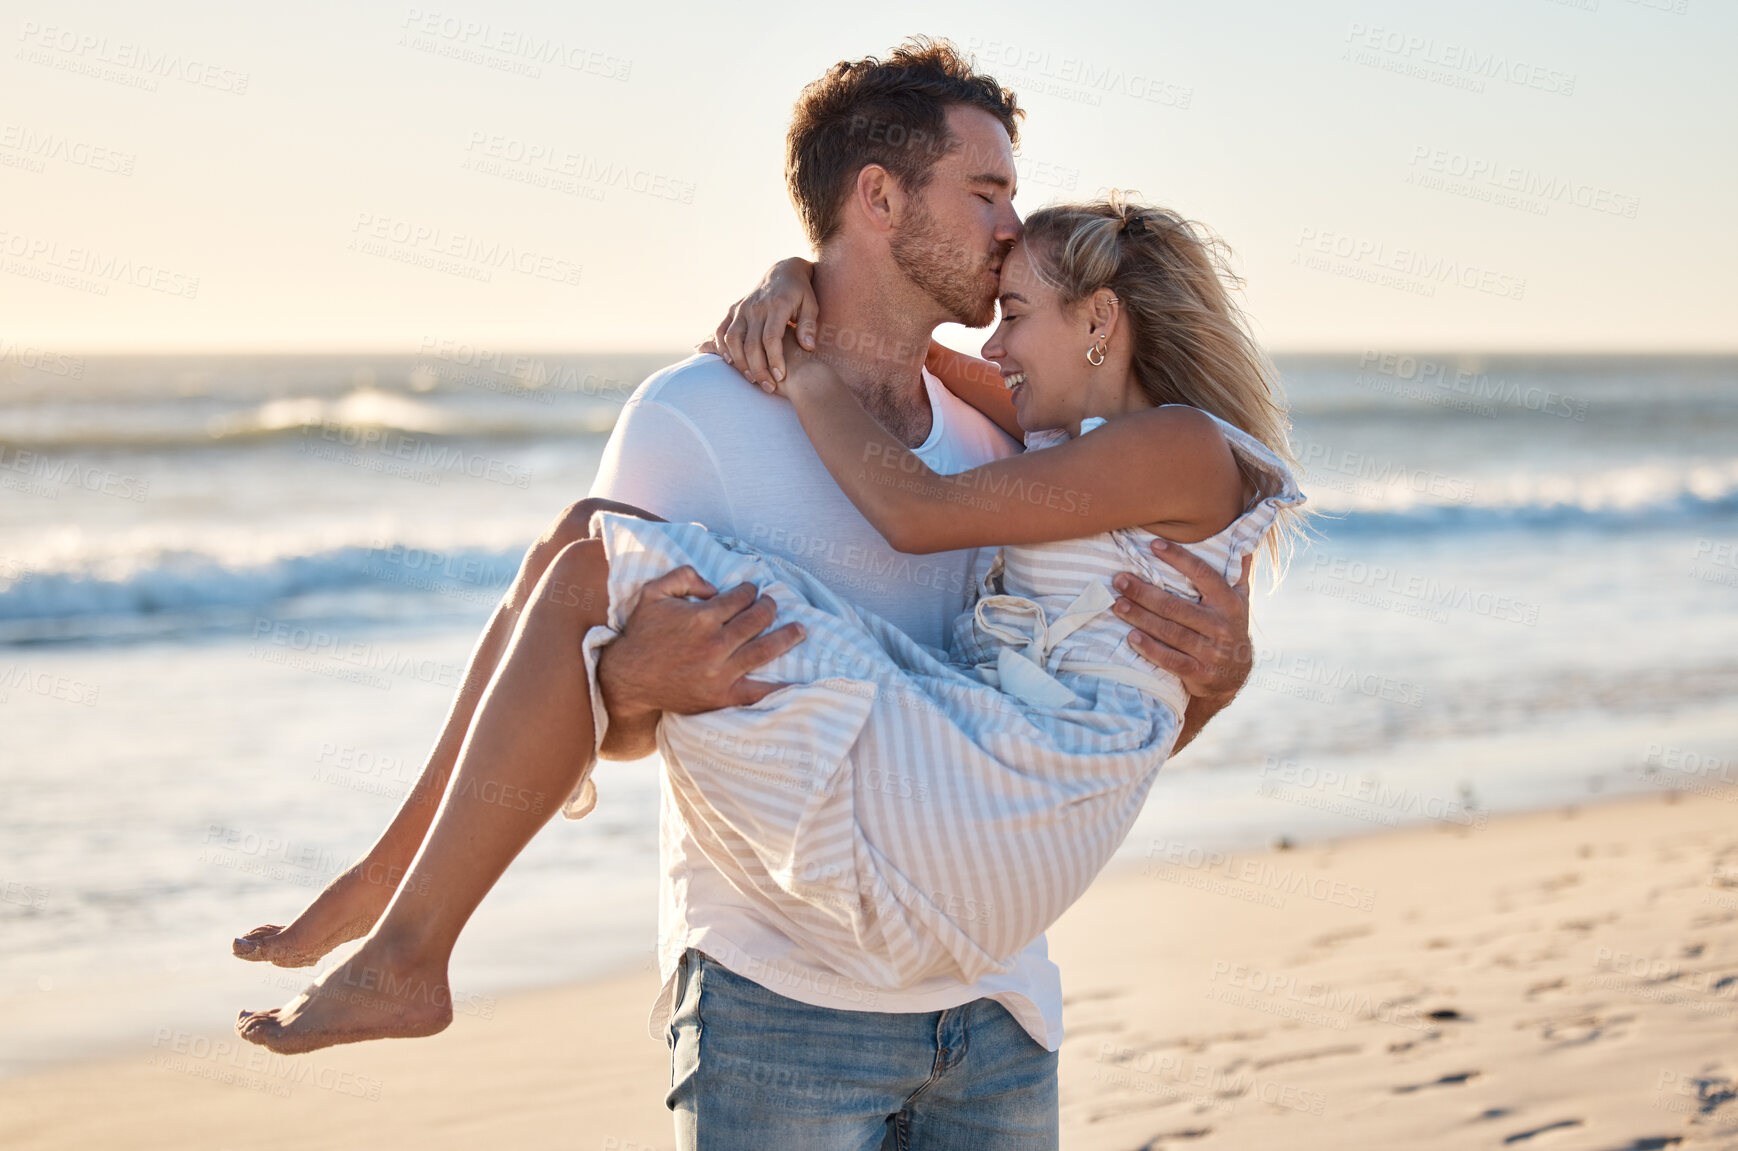 Buy stock photo Kiss, beach and man carrying woman for romantic sunset embrace on Australia holiday in summer. Couple, love and happy man holding partner with care, gratitude and respect on ocean walk.

